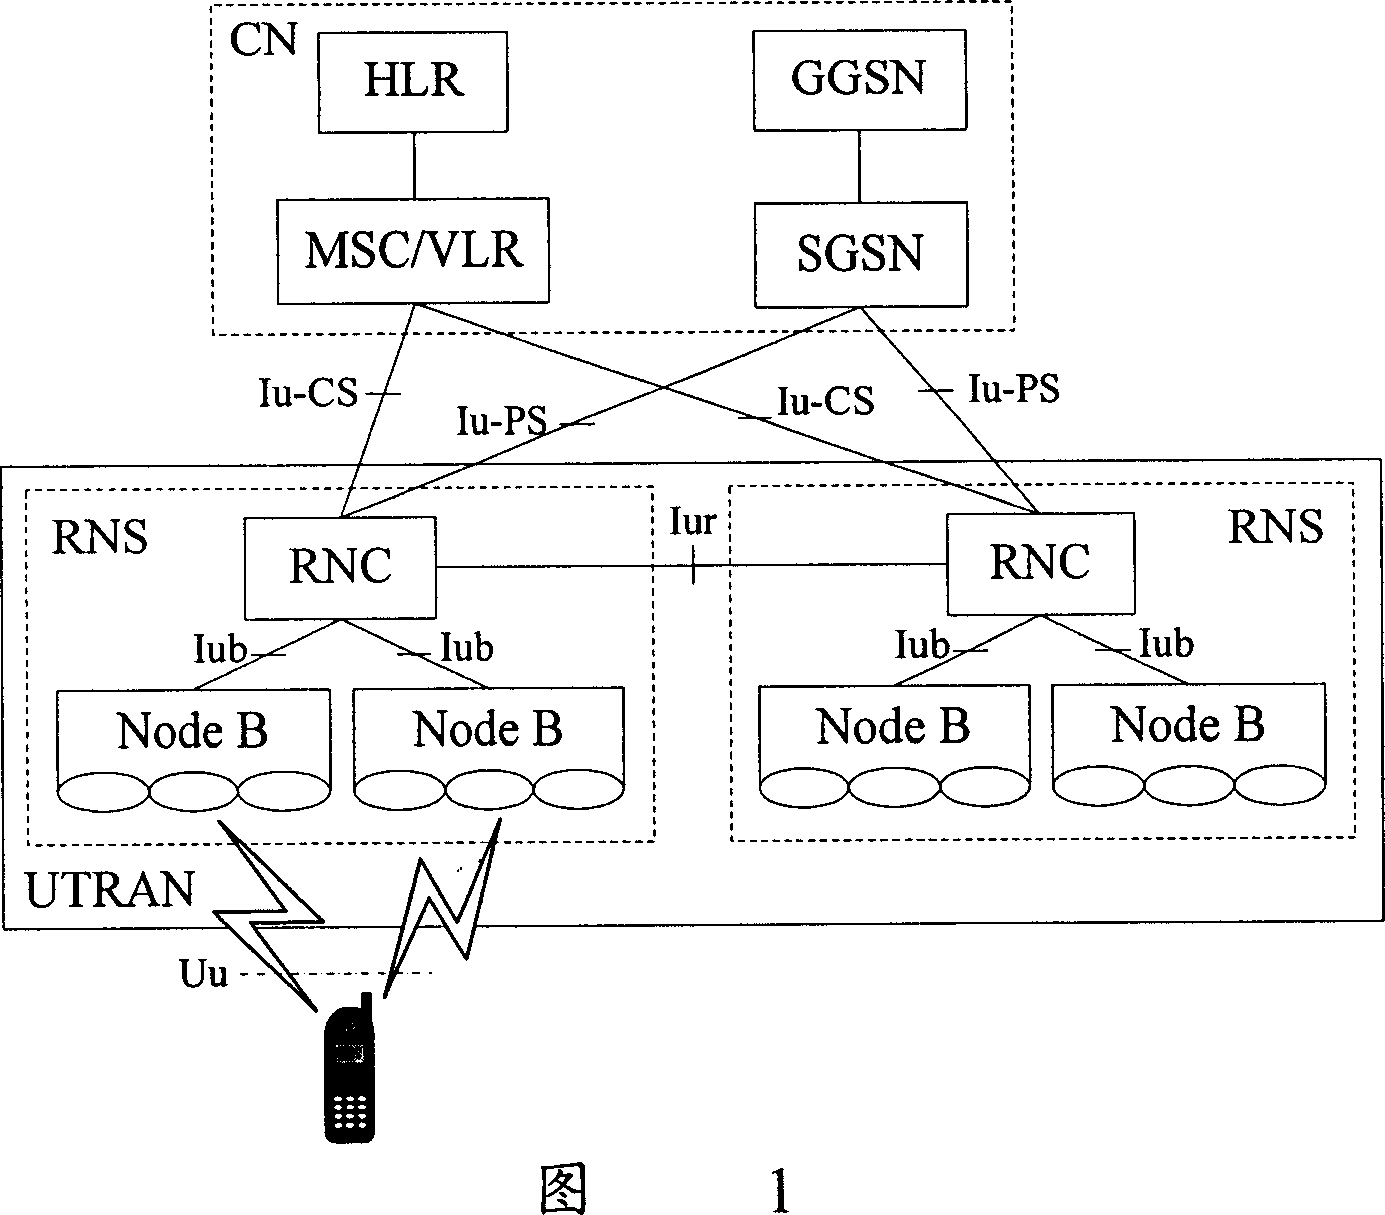 System and method of interconnection between network of universal mobile communication system and evolution network